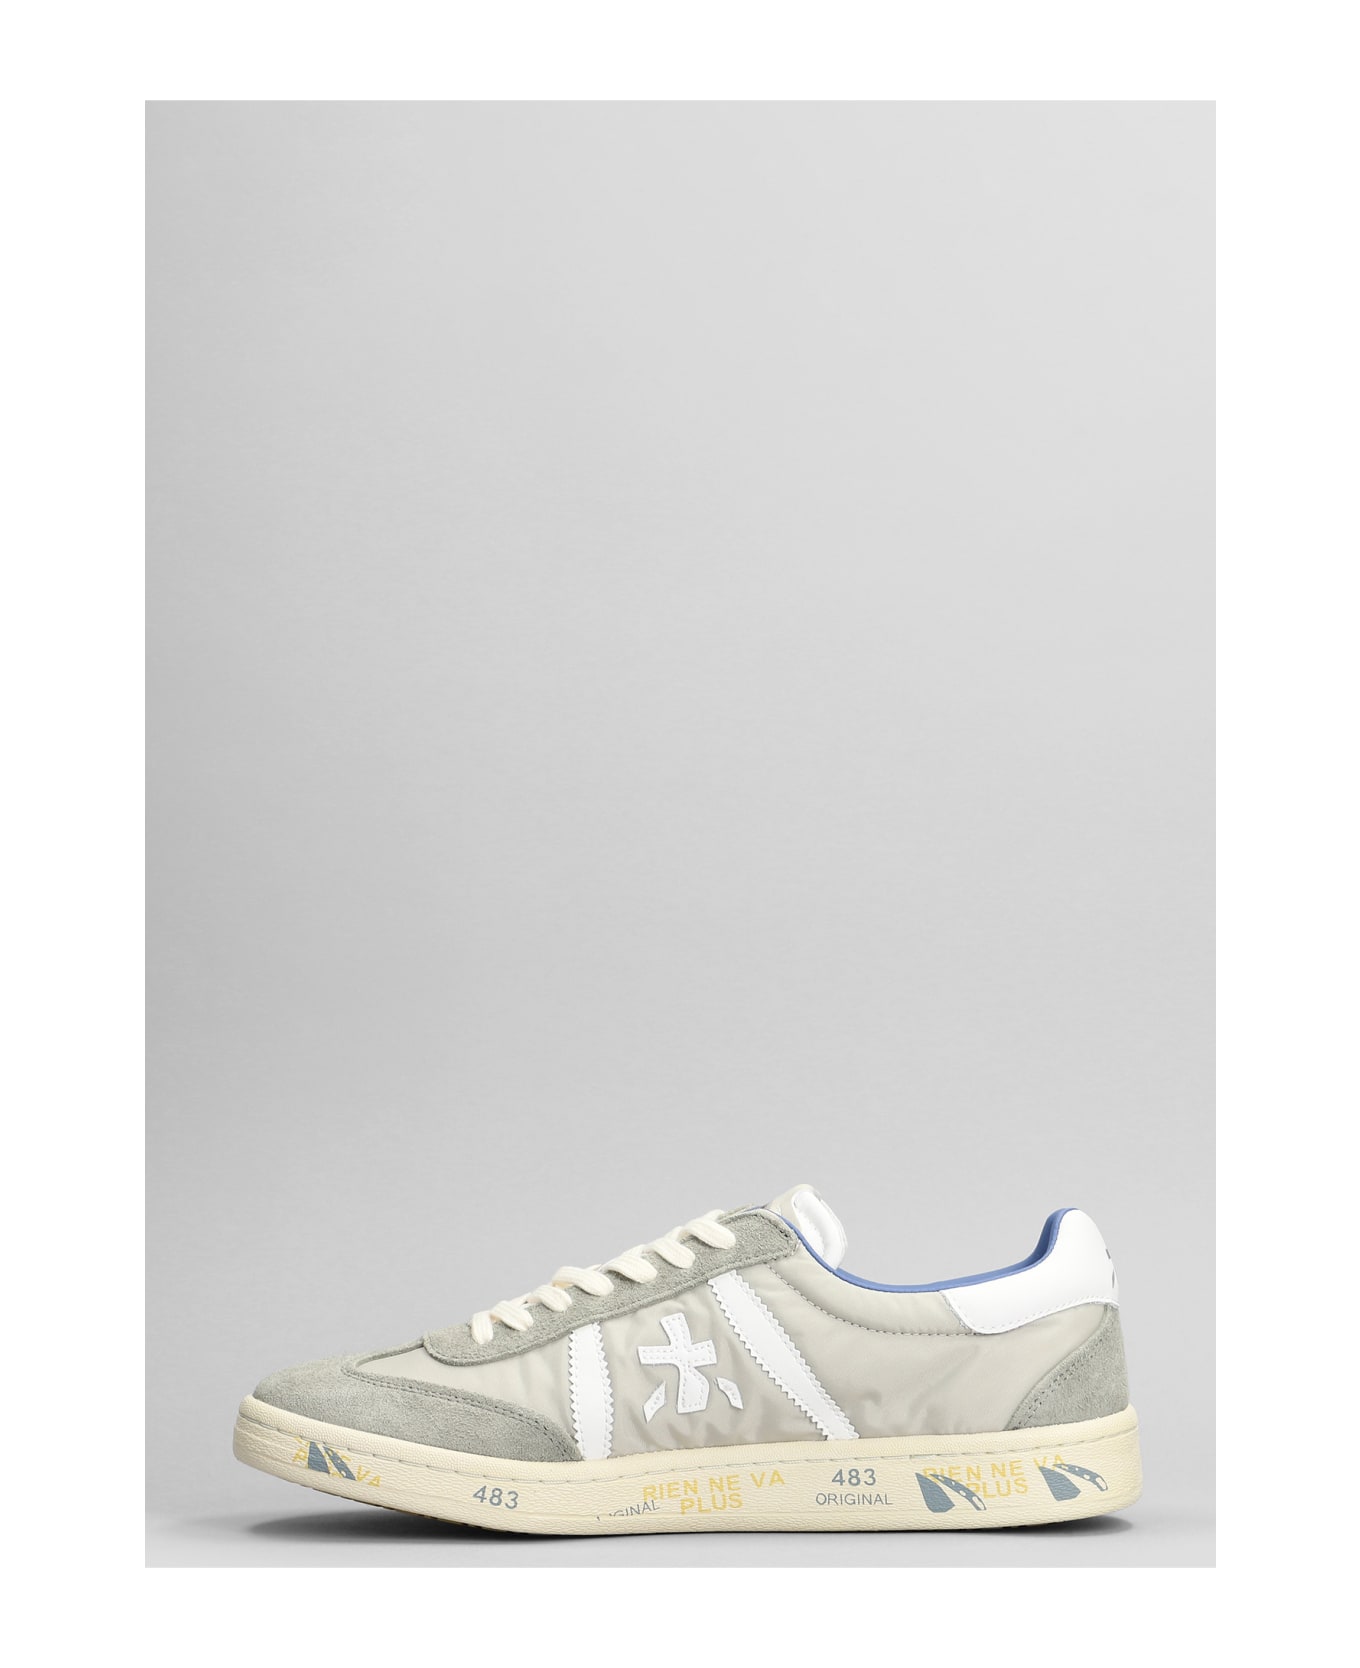 Premiata Bonnie Sneakers In Grey Suede And Fabric - grey